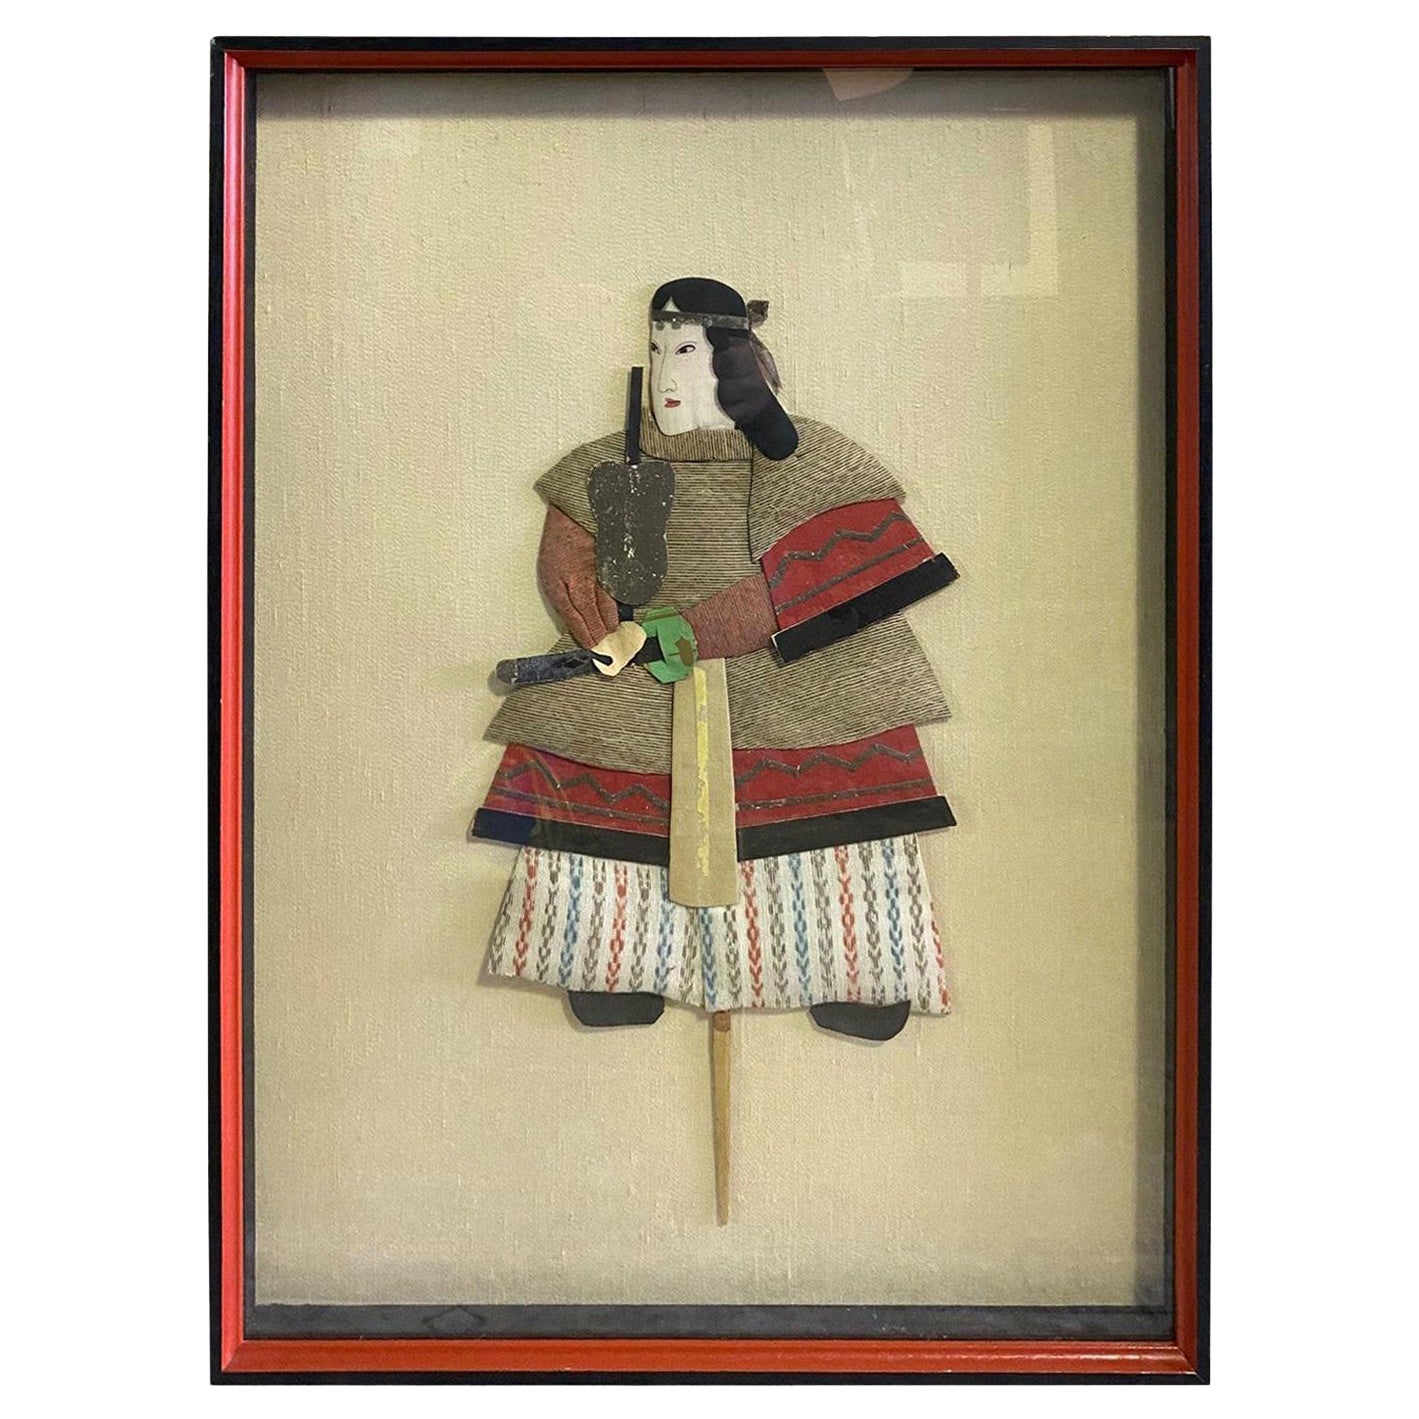 Japanese Oshie Pressed Textile Samurai Framed Shadow Puppet Doll